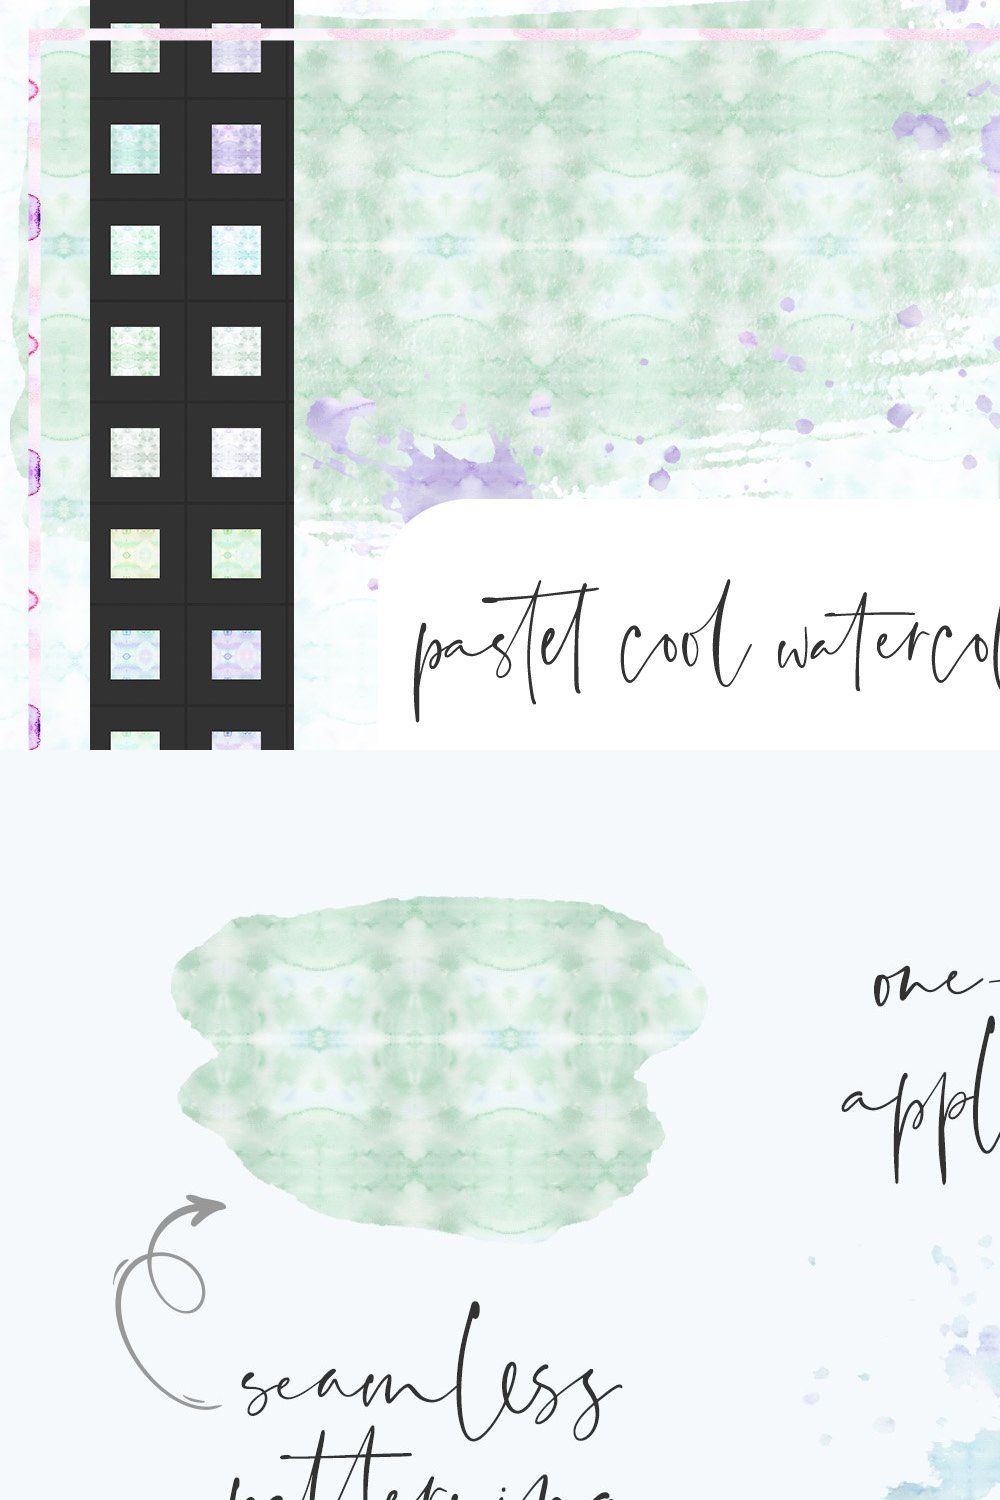 Pastel Cool Watercolor PS Styles pinterest preview image.